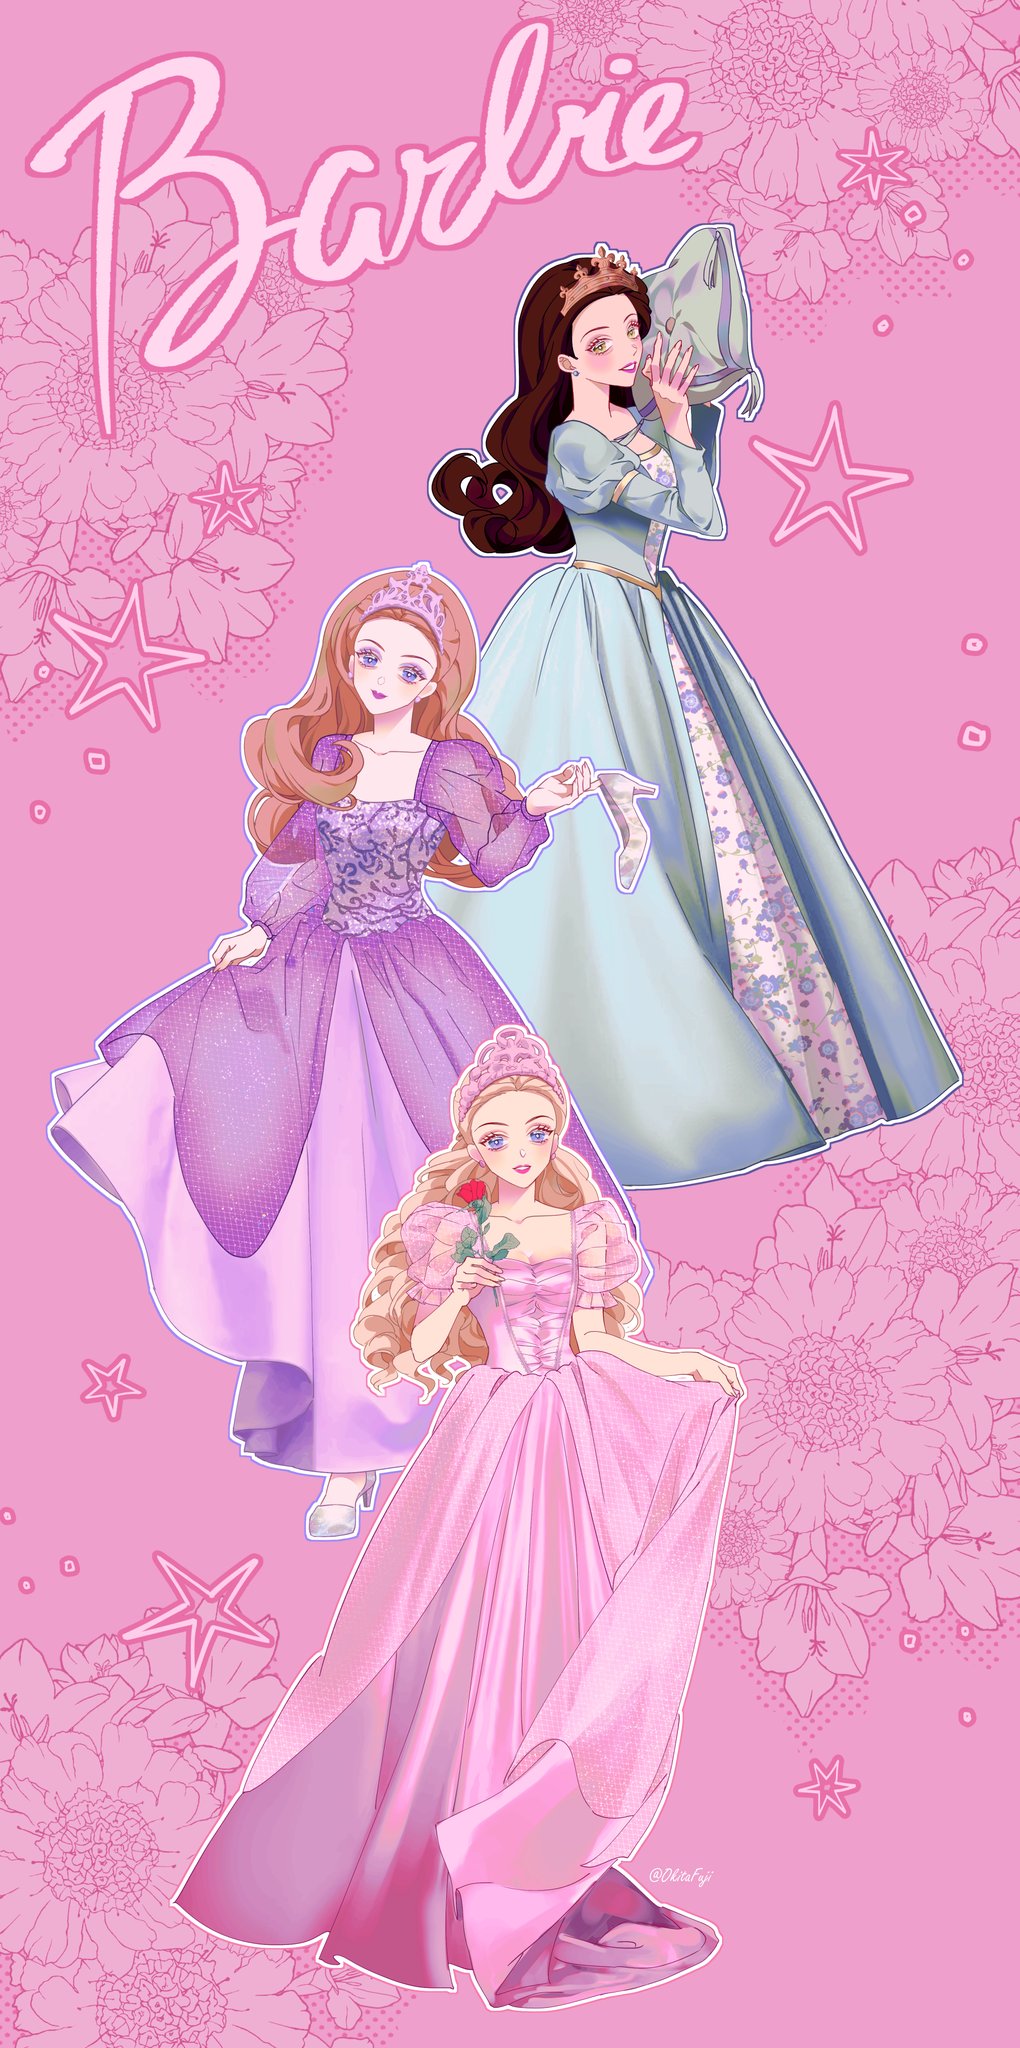 3girls barbie_(character) barbie_(franchise) black_hair blonde_hair blue_eyes caption cinderella cinderella_(grimm) copyright_name corset crown curly_hair curtsey doll dress earrings floral_background floral_print flower formal glass_slipper gown green_dress green_eyes grimm's_fairy_tales head_tilt high_heels highres holding holding_flower holding_pillow holding_shoes jewelry juliet_sleeves logo long_dress long_sleeves multiple_girls name_tag object_hug okitafuji paneled_background pillow pink_background pink_dress princess_and_the_pea puffy_short_sleeves puffy_sleeves purple_dress redhead rose see-through_sleeves shoes shoes_removed short_sleeves single_shoe skirt_hold sleeping_beauty sleeping_beauty_(character) smile square_neckline star_(symbol) tiara